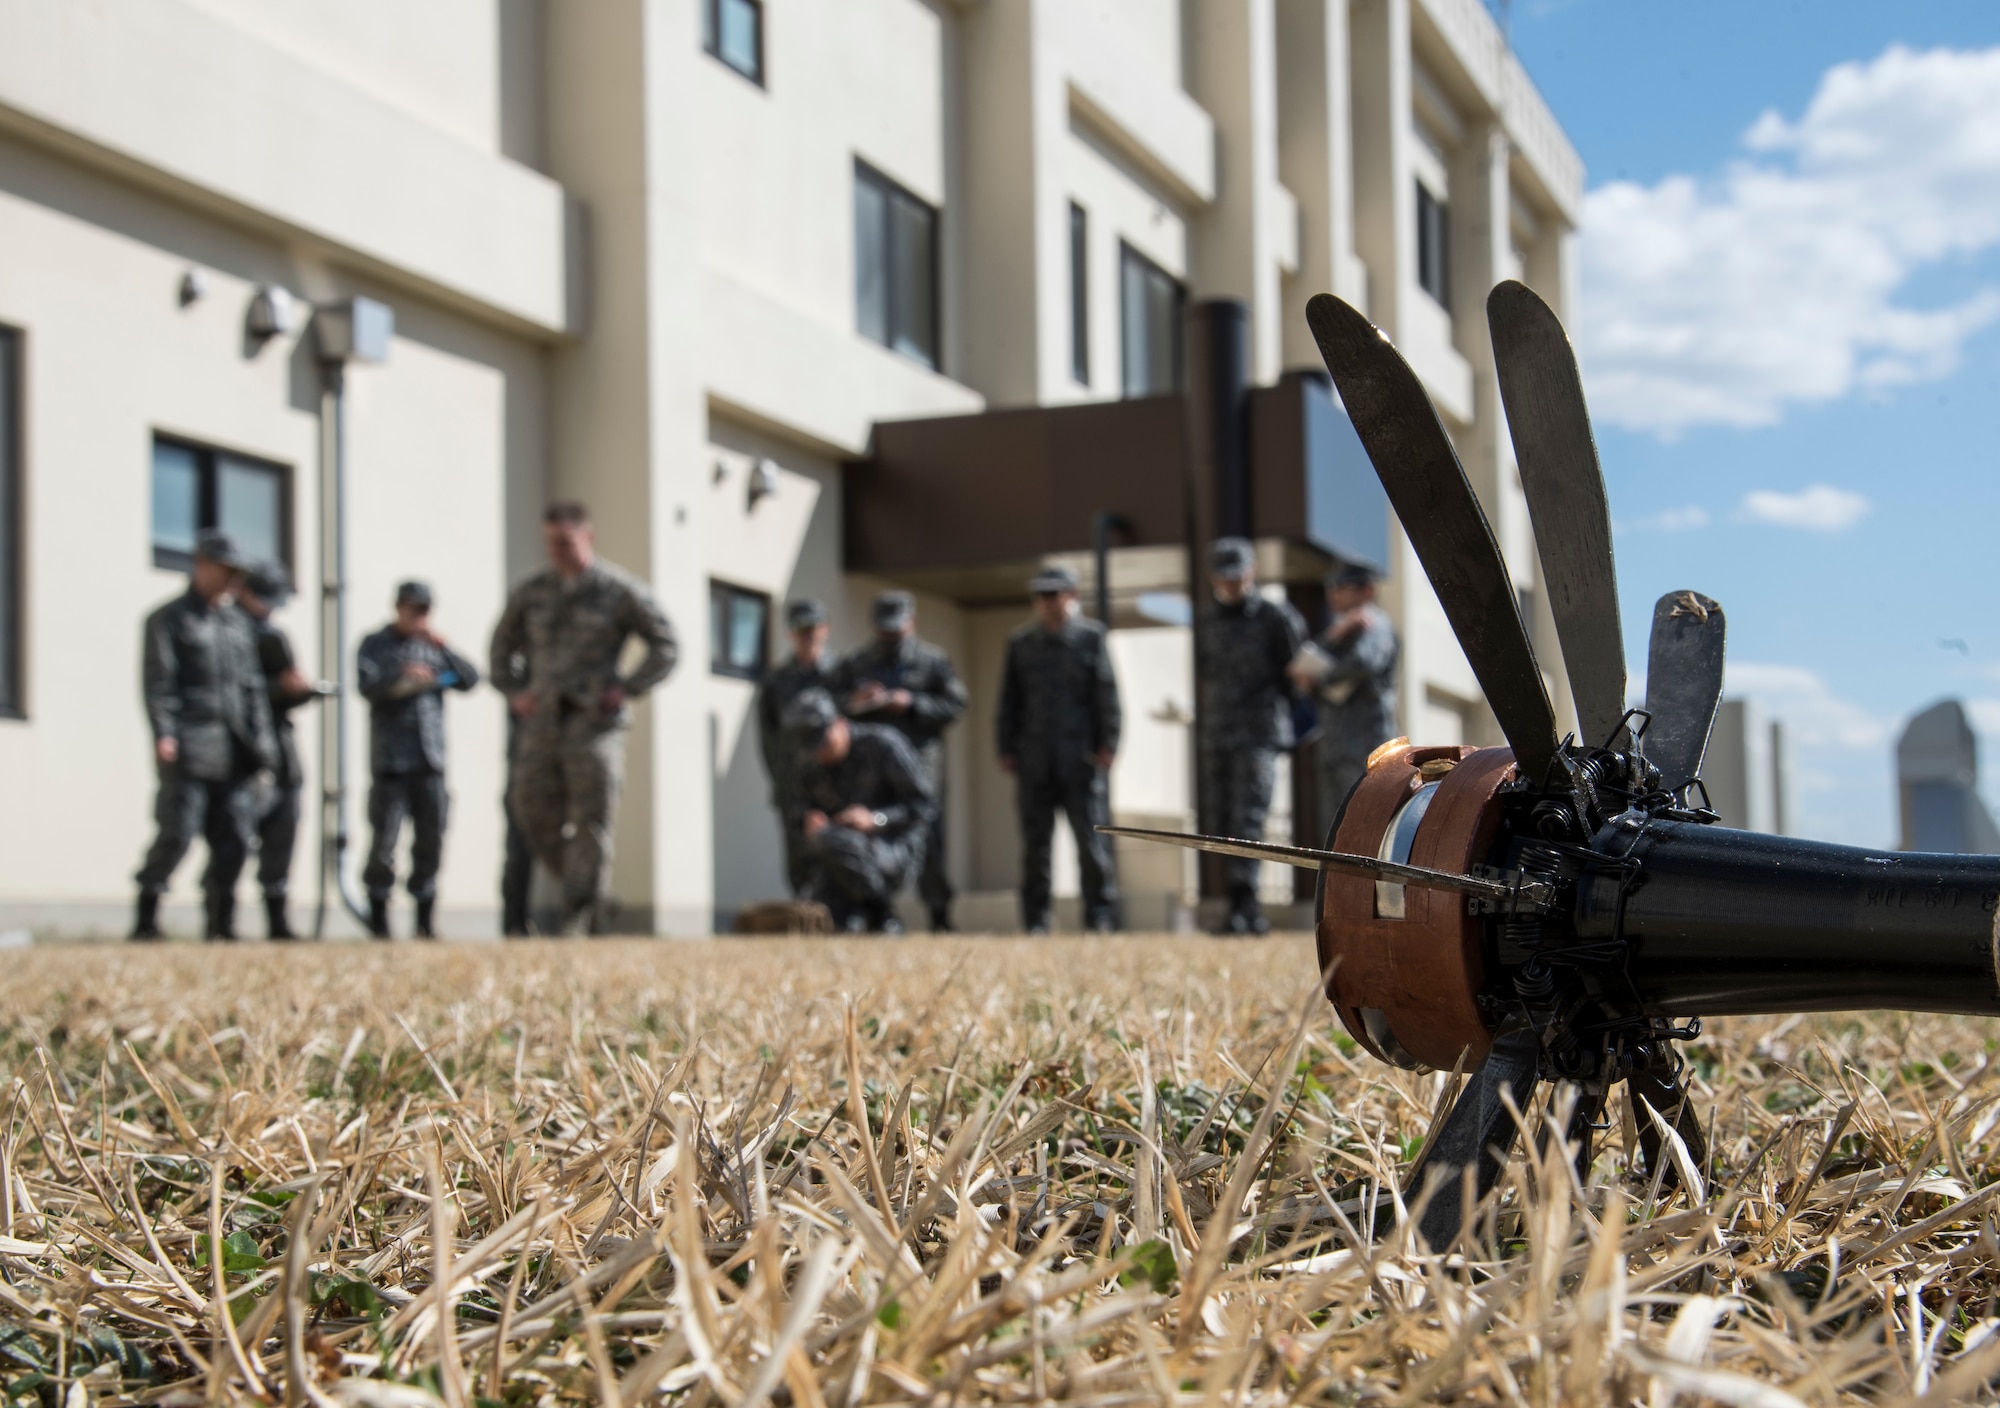 An inert foreign rocket lays exposed during unexploded ordnance disposal reconnaissance
training at Misawa Air Base, Japan, March 30, 2018. During the training, the 35th Civil Engineer
Squadron explosive ordnance disposal teams worked with Japan Air Self-Defense Force Airmen
from the 3rd Air Wing and the Tohoku Subordinate Base, Tohoku, Japan, EOD unit to practice
executing a bilateral mission together. They also took the time to train newer JASDF personnel
on foundational methods of UXO reconnaissance. (U.S. Air Force photo by Senior Airman Sadie
Colbert)